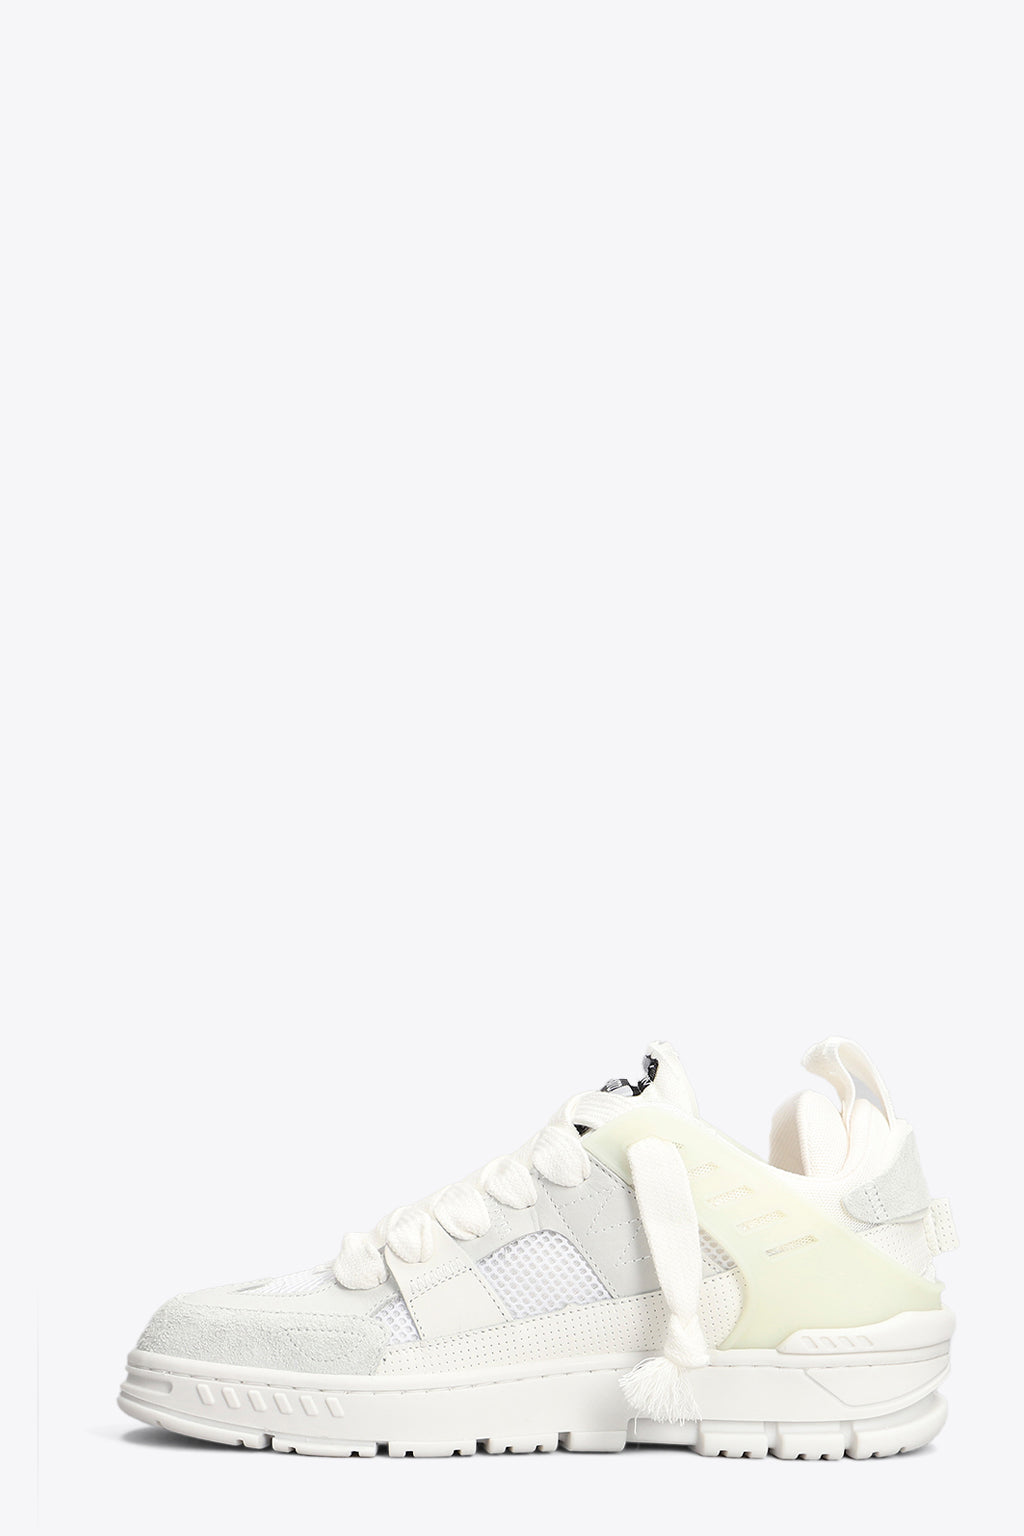 alt-image__White-leather-and-suede-low-chunky-sneaker---Area-Patchwork-Sneaker